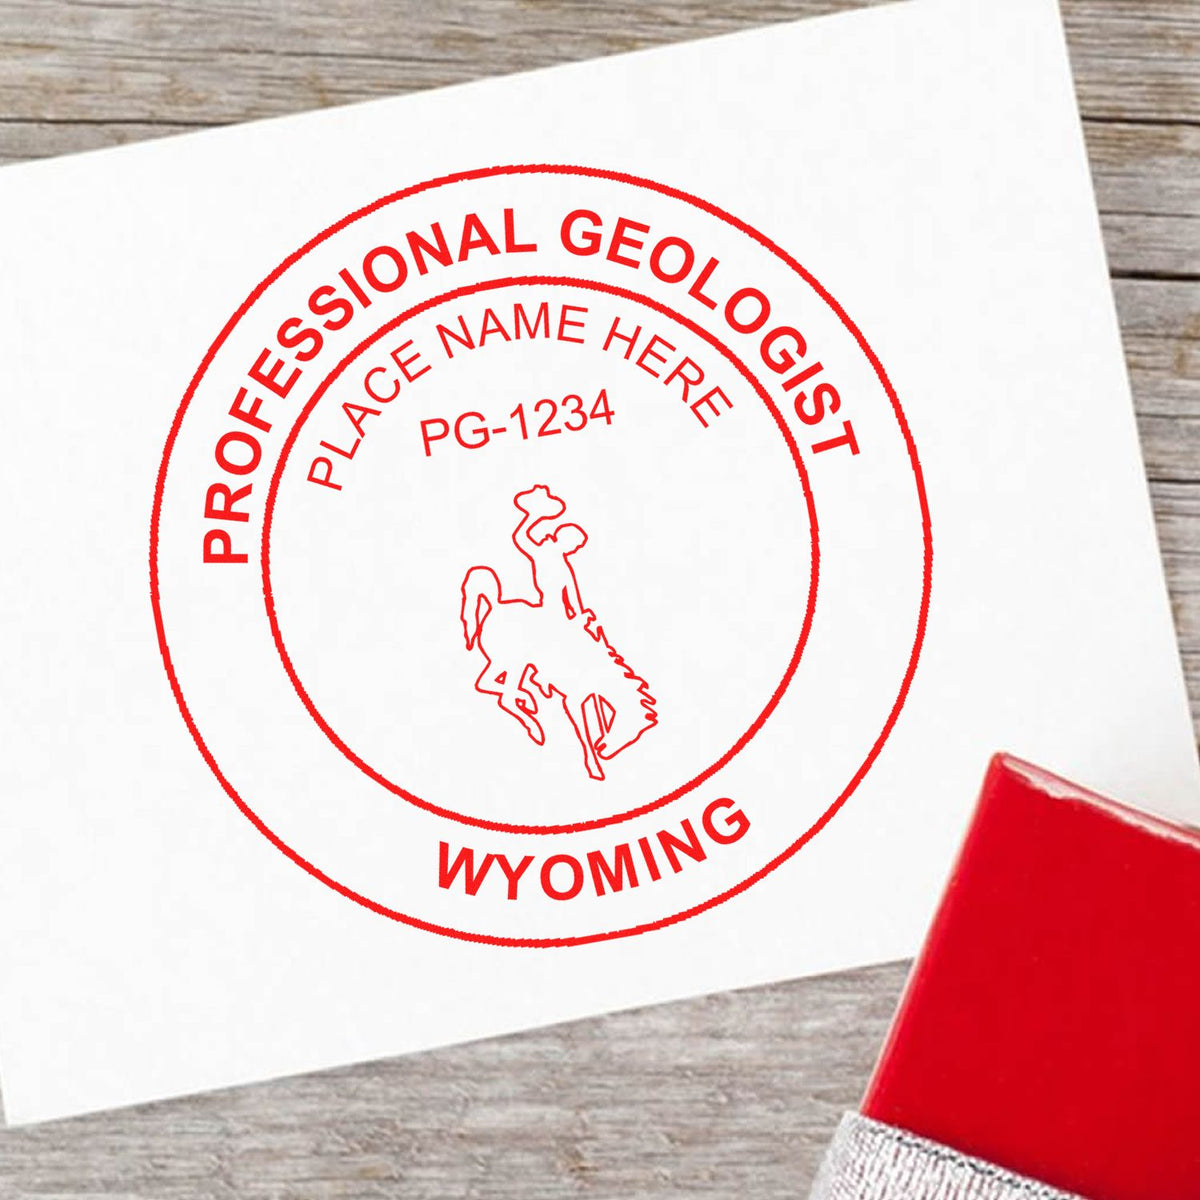 An in use photo of the Digital Wyoming Geologist Stamp, Electronic Seal for Wyoming Geologist showing a sample imprint on a cardstock